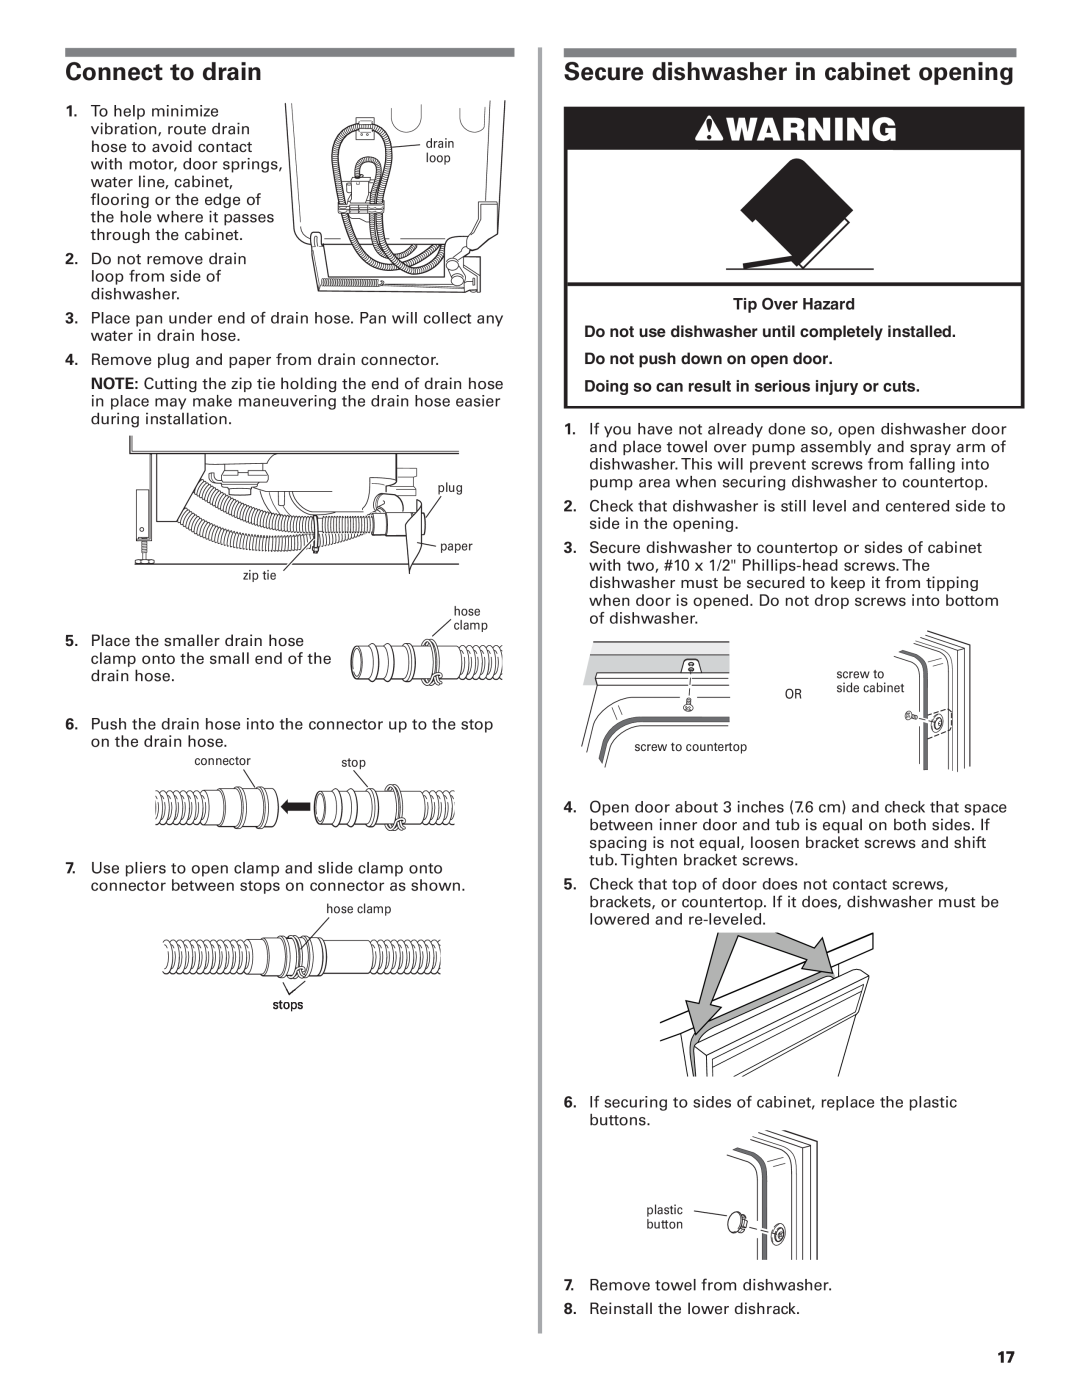 KitchenAid 8564554 installation instructions Connect to drain, Secure dishwasher in cabinet opening, Tip Over Hazard 